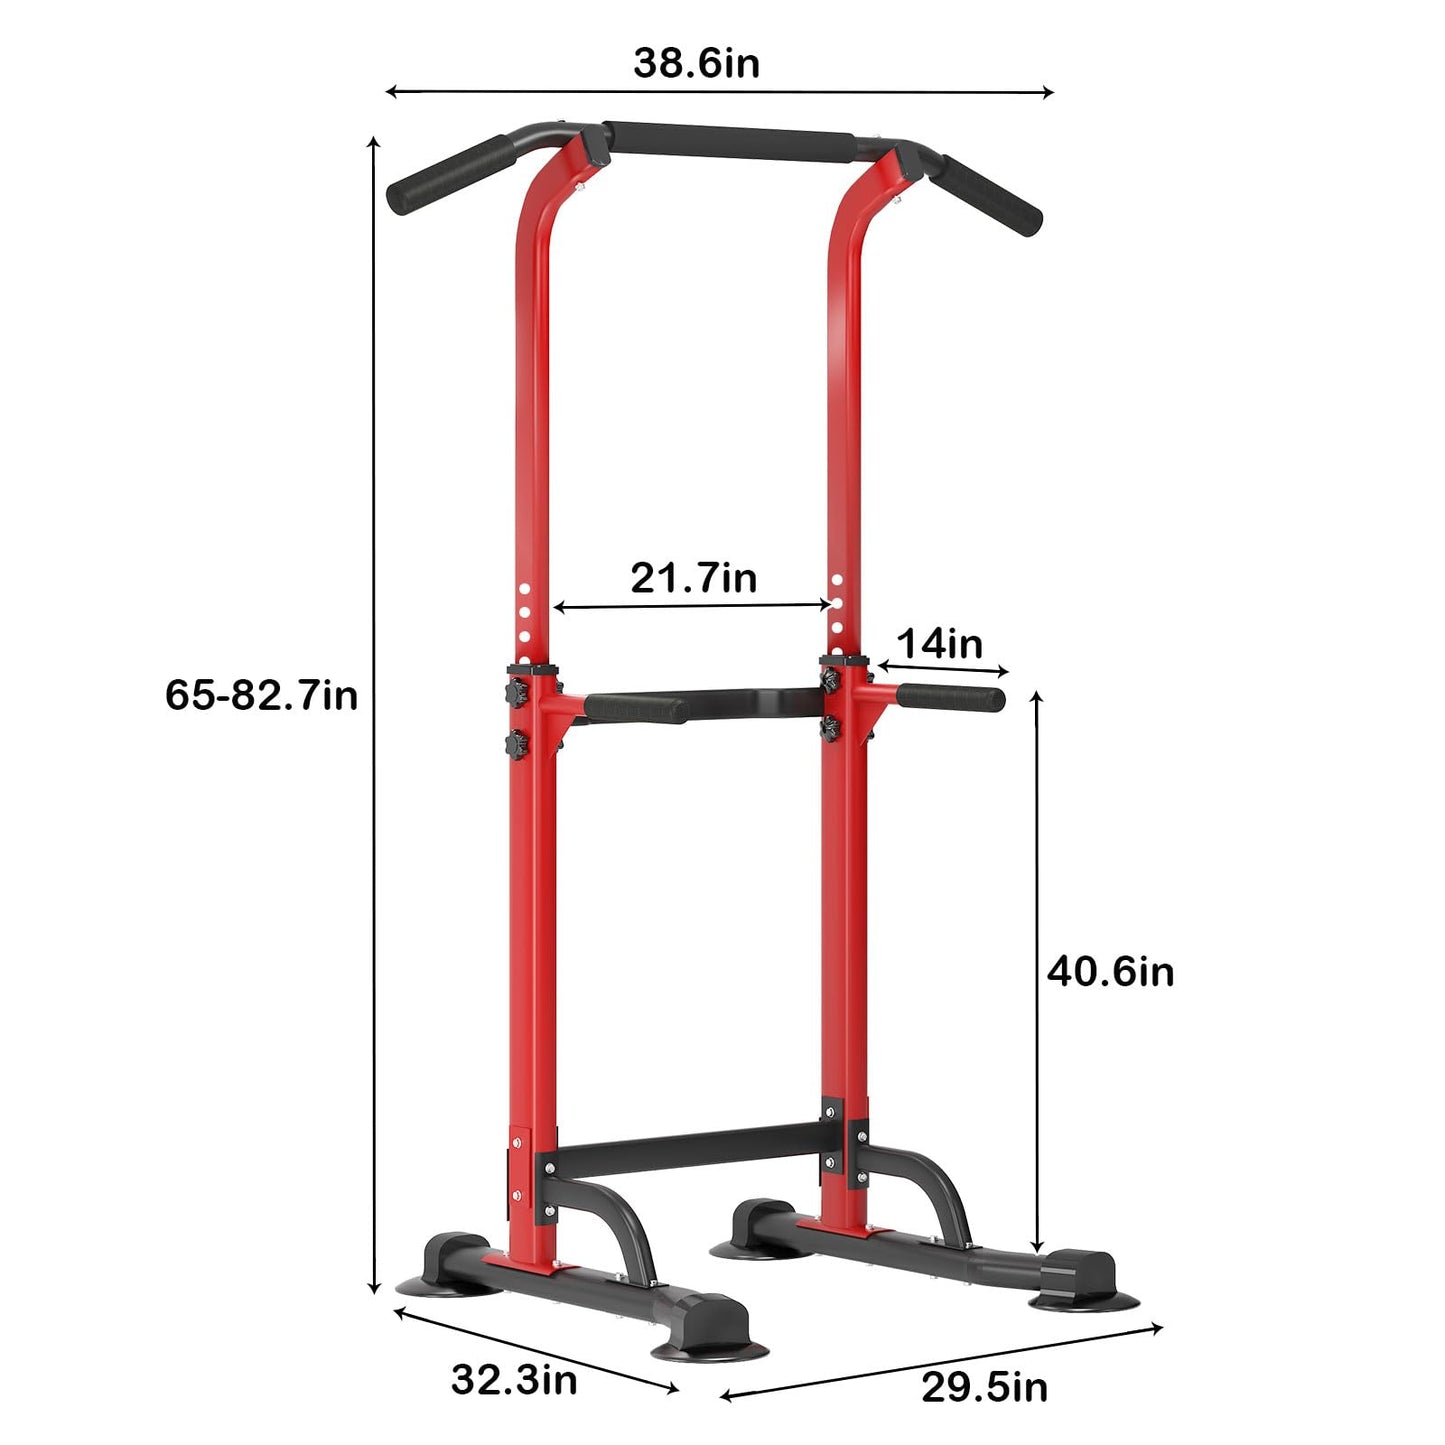 SogesHome Power Tower Pull Up Bar and Dip Station Adjustable Height Dip Stand Multi-Functional Strength Training Fitness Workout Station, Red